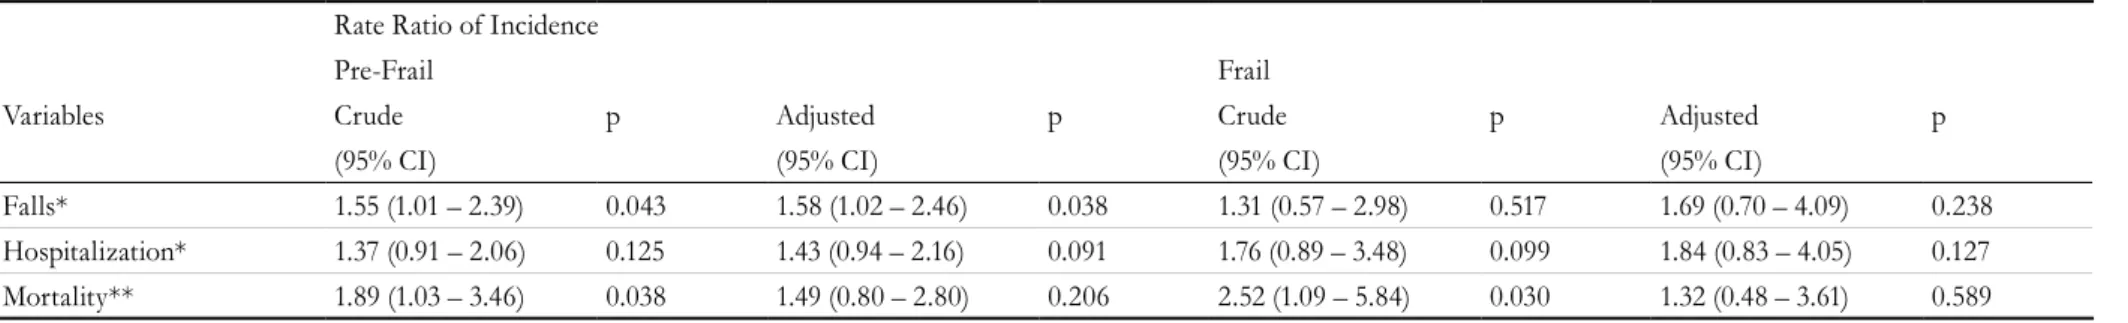 Table 3. Rate ratio of incidence of falls and hospitalization and mortality risk ratio between the pre-frail and frail groups and the robust group over five and a half years of  follow-up (Juiz de Fora, Minas Gerais